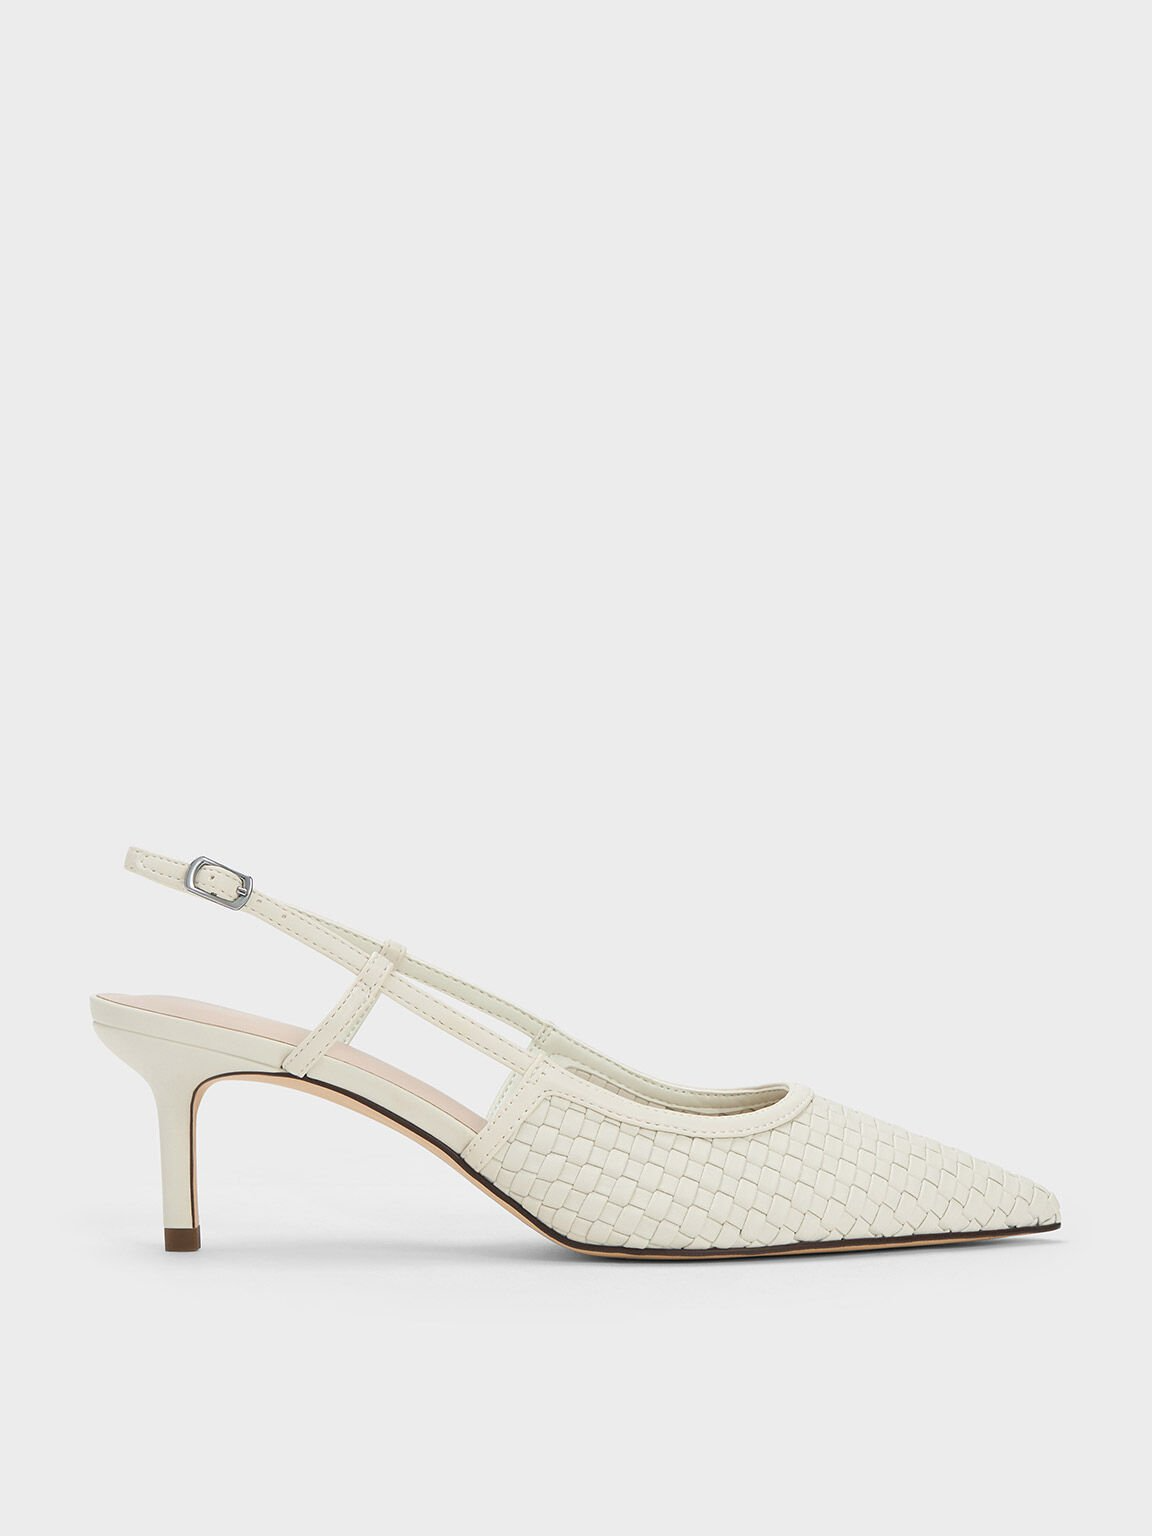 Charles & Keith + Woven Slingback Pumps